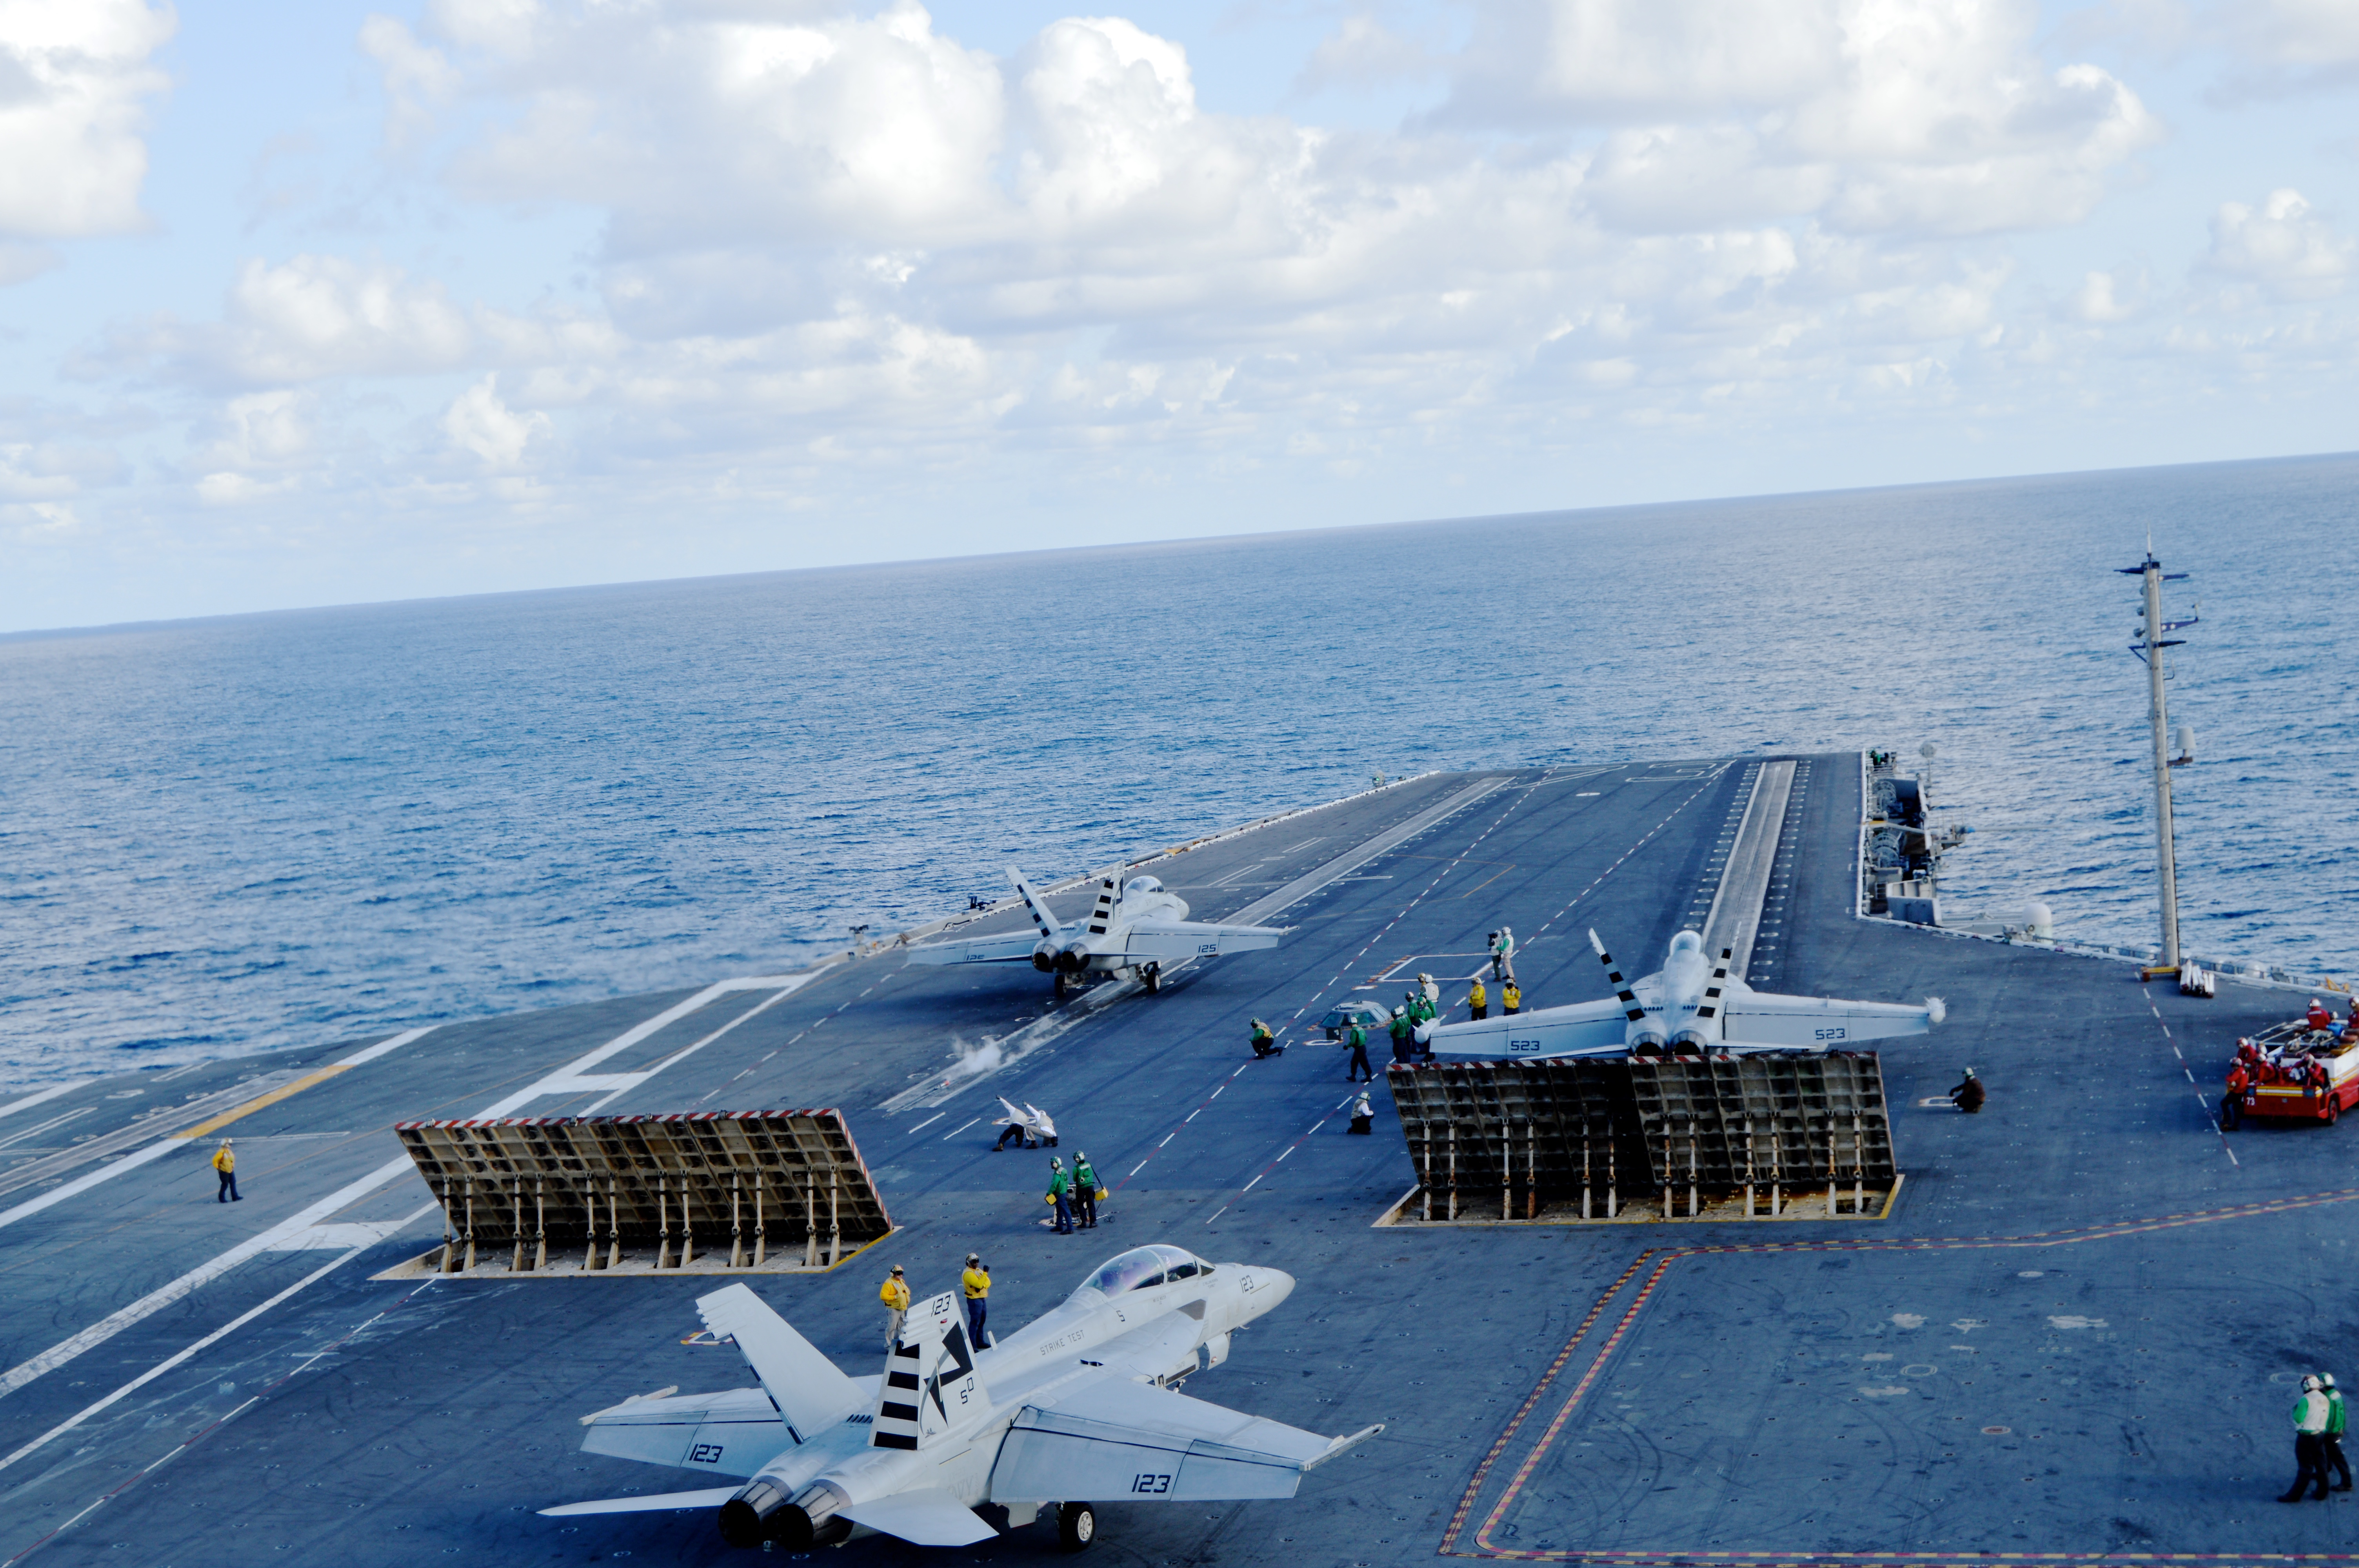 F/A-18F Super Hornets and an EA-18G Growler in Air Test and Evaluation Squadron (VX) 23 prepare to launch from the deck of USS George Washington (CVN-73) on June 27, 2016, while testing the MAGIC CARPET carrier landing assistance technology. USNI News photo.